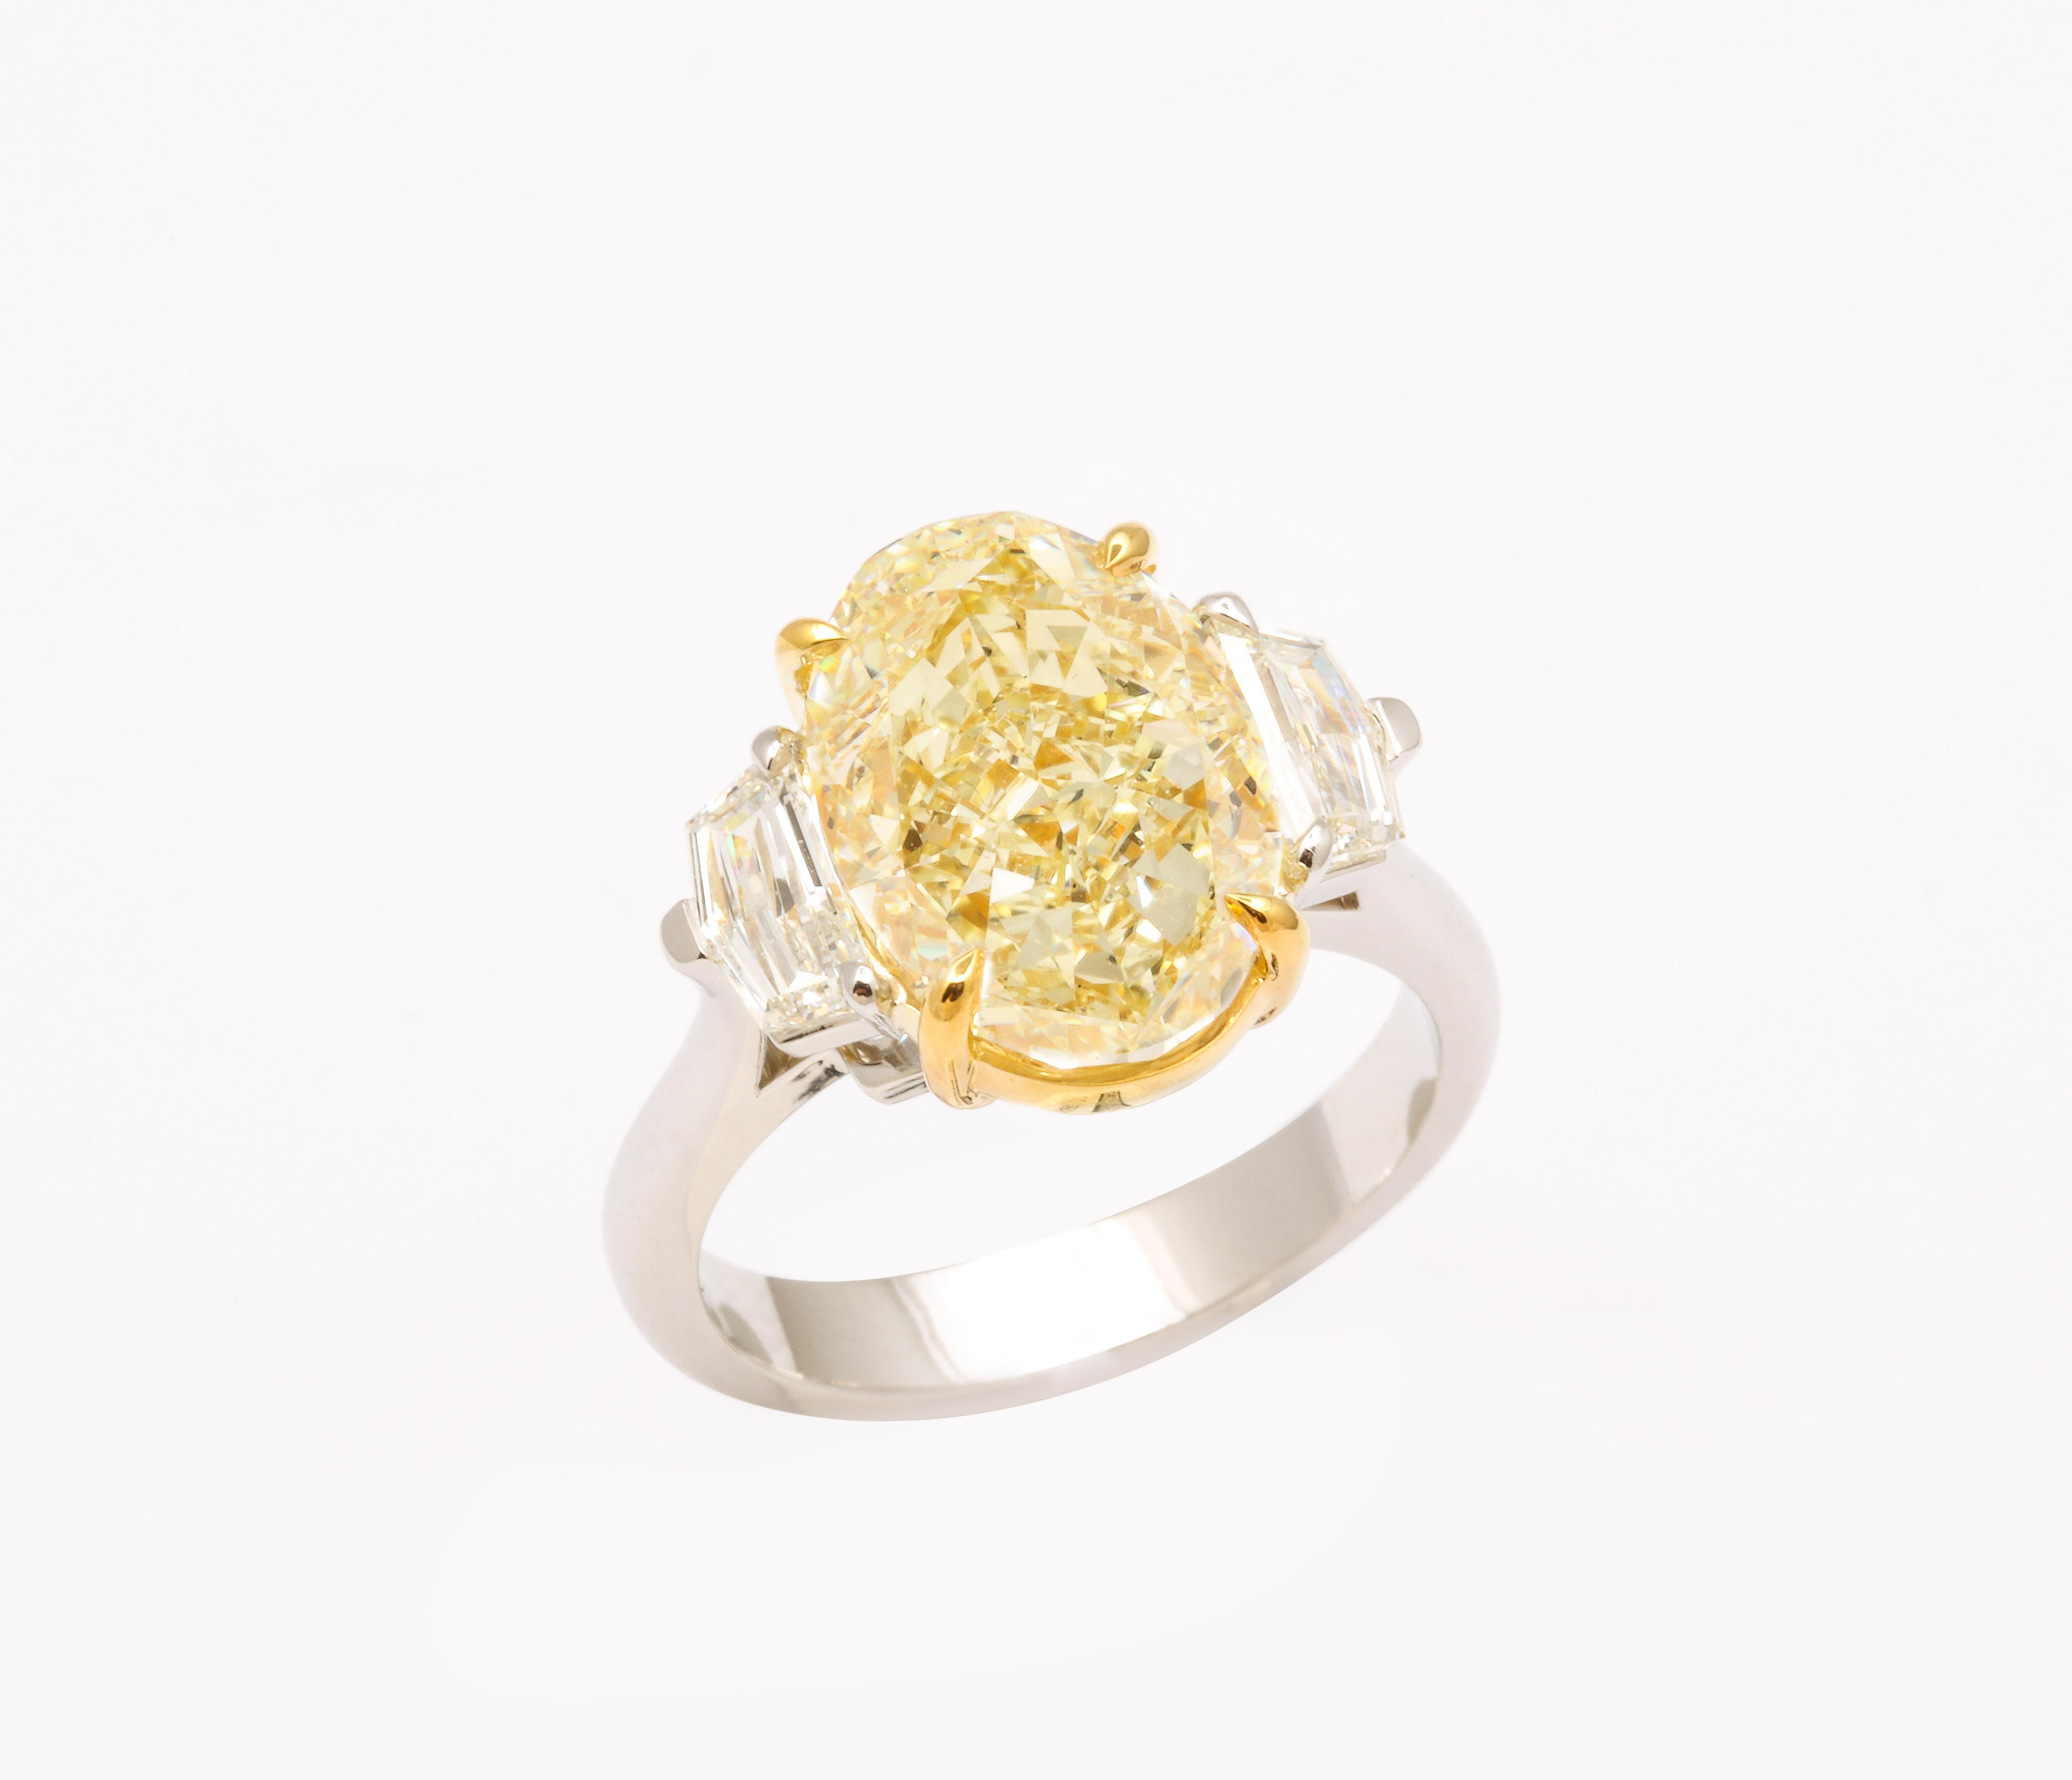 Women's or Men's 6 Carat Oval Yellow Diamond Ring Gia Certified For Sale